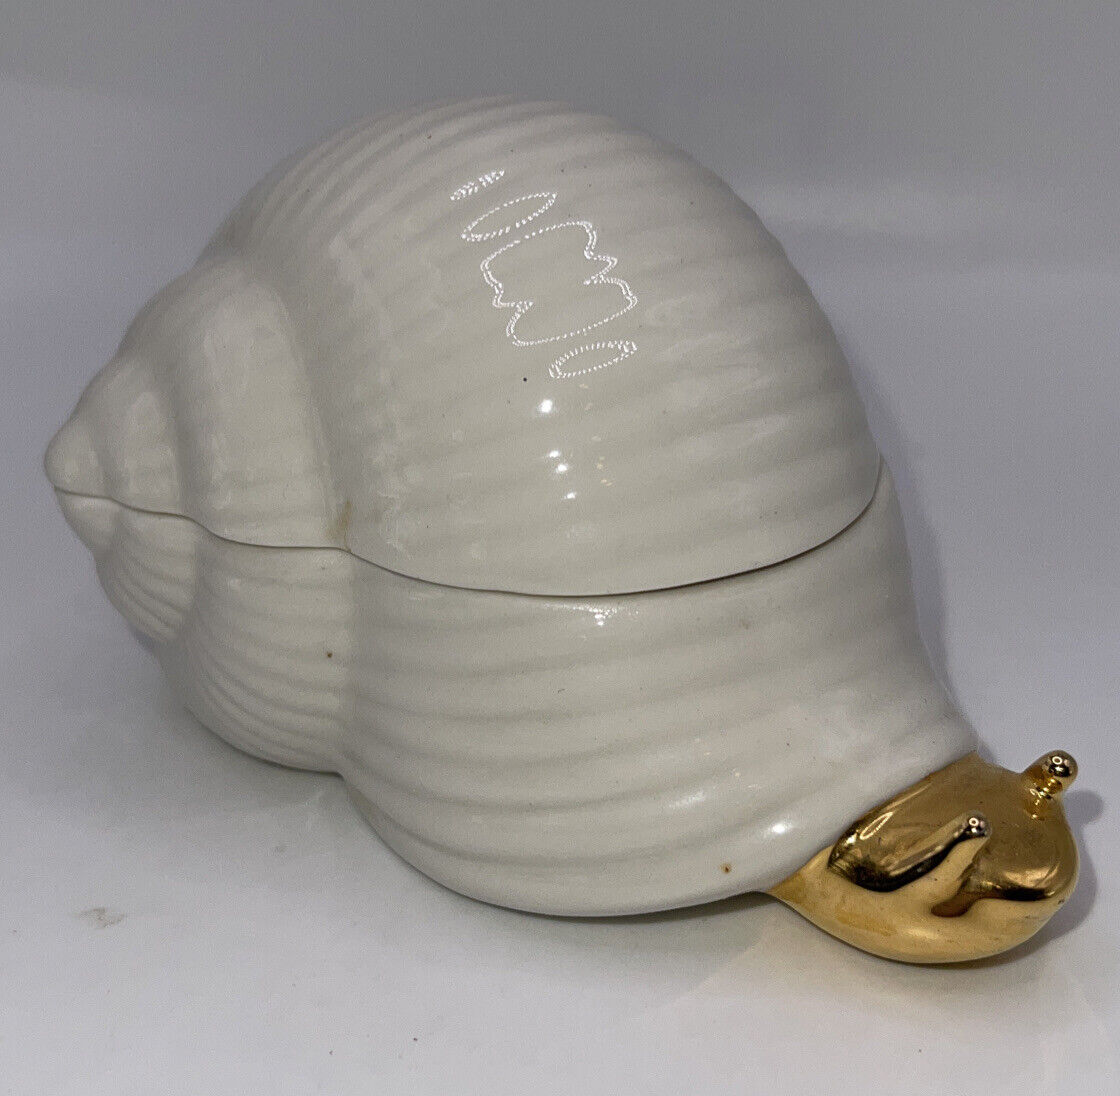 D\'Arte Agostinelli Porcelain hand painted Snail Trinket Box Italy gold 4 Inches